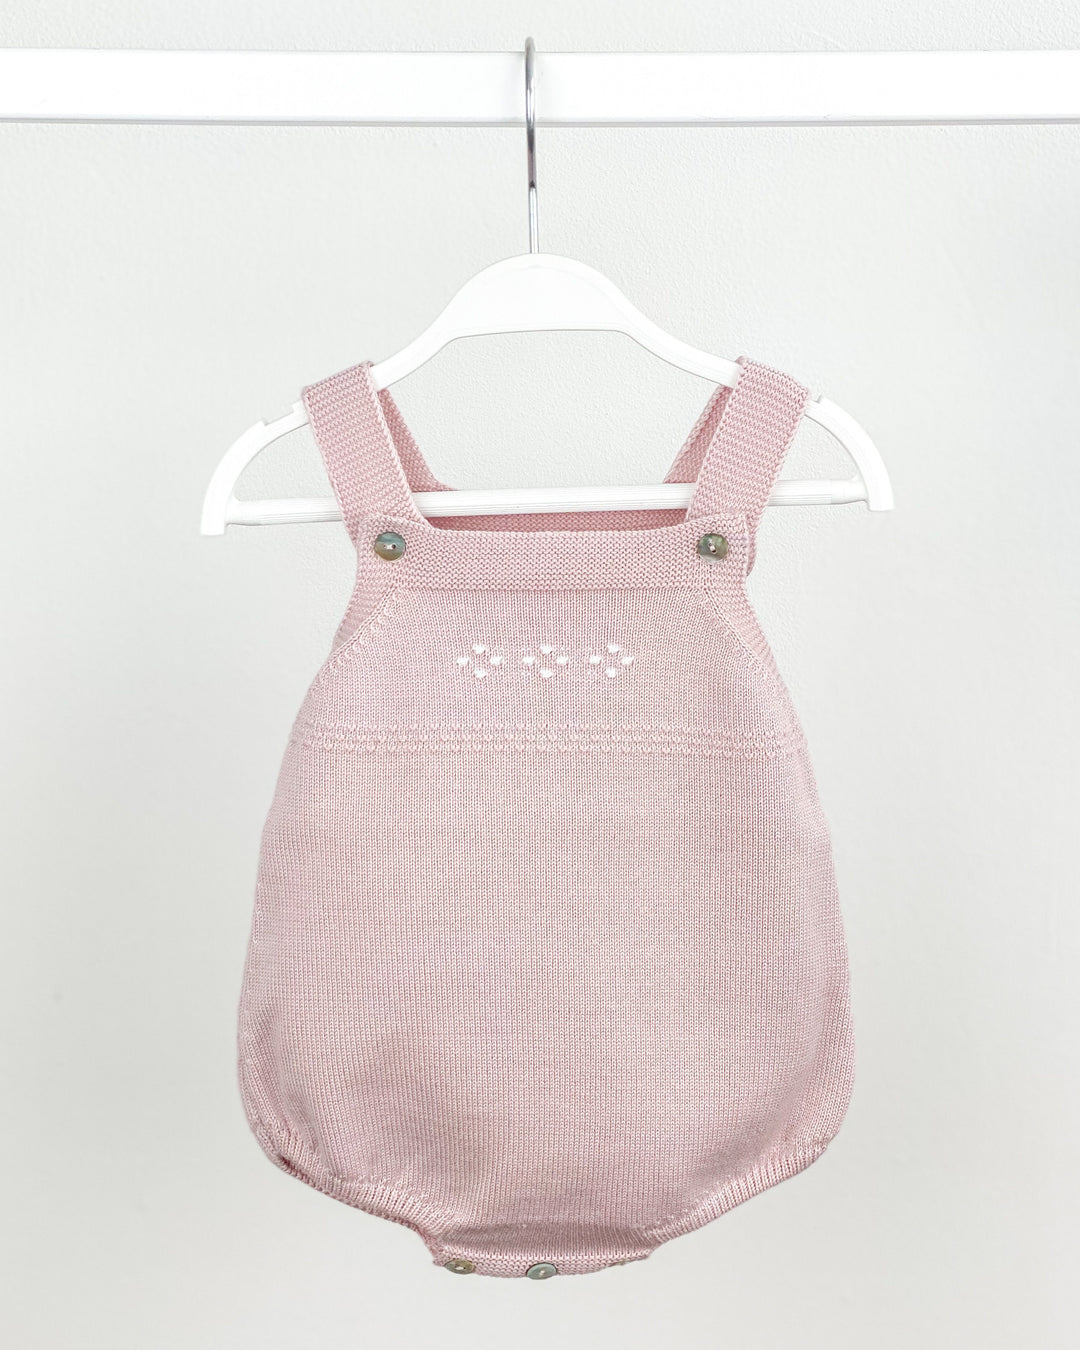 Granlei Classic Knitted Dungaree Romper - Pale Rose | Millie and John